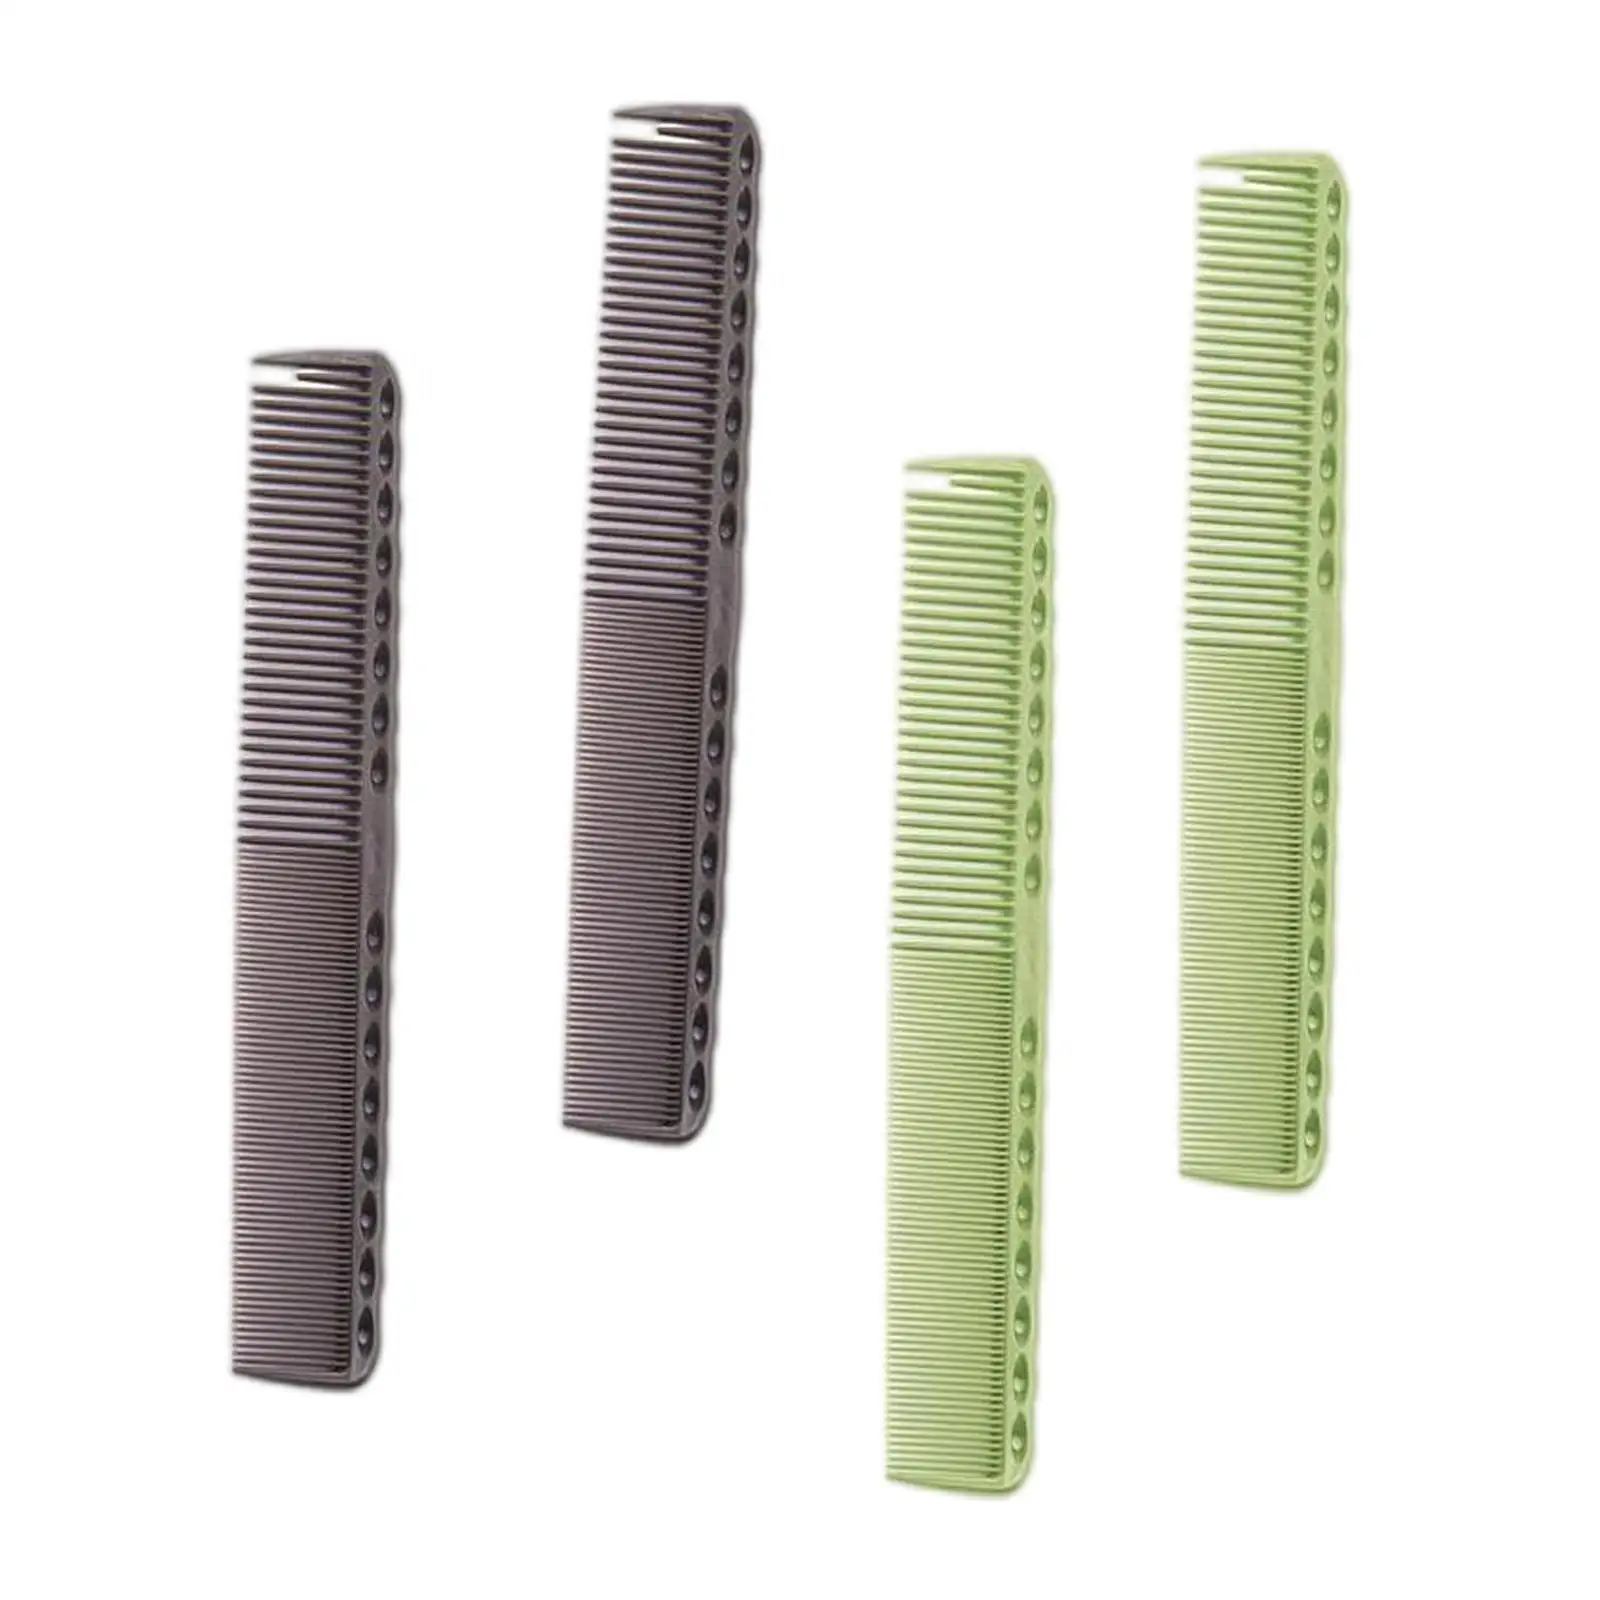 4pcs Professional Barber Hairdressing Comb Hair Cutting Styling Combs Tool